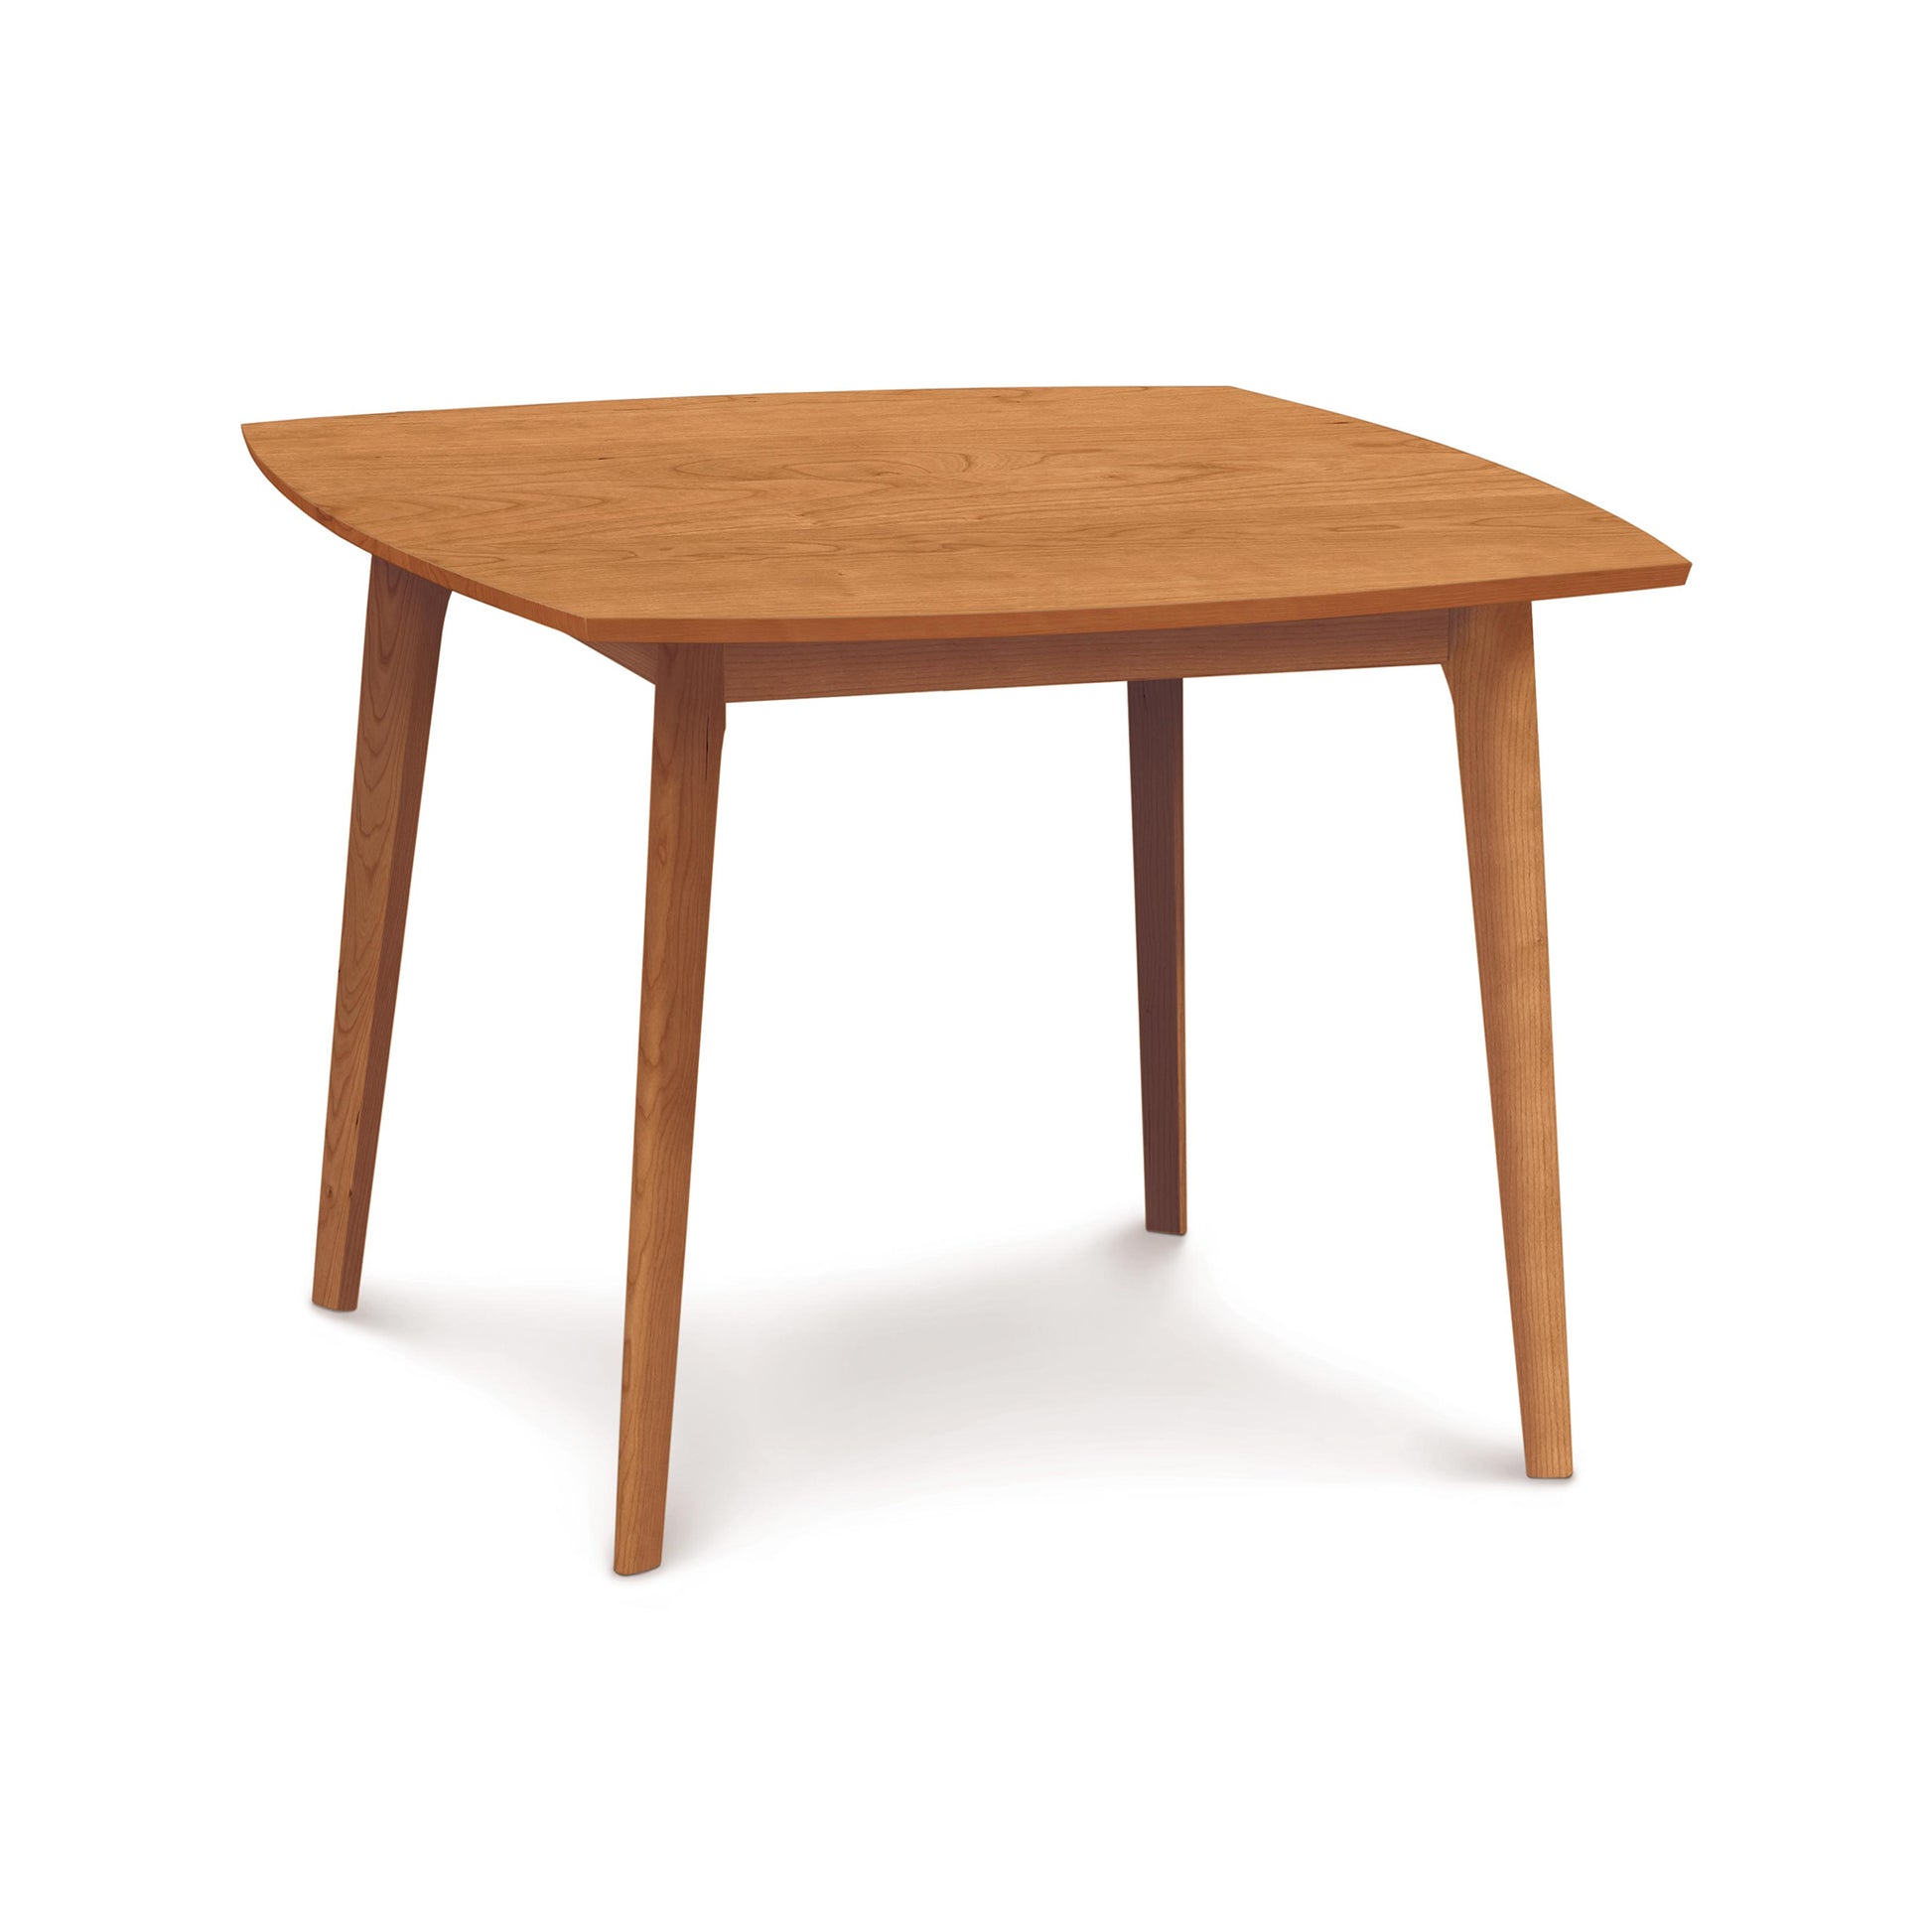 A Catalina Solid-Top Table by Copeland Furniture with sustainably-sourced hardwoods and four legs, featuring a rounded triangular top on a white background.